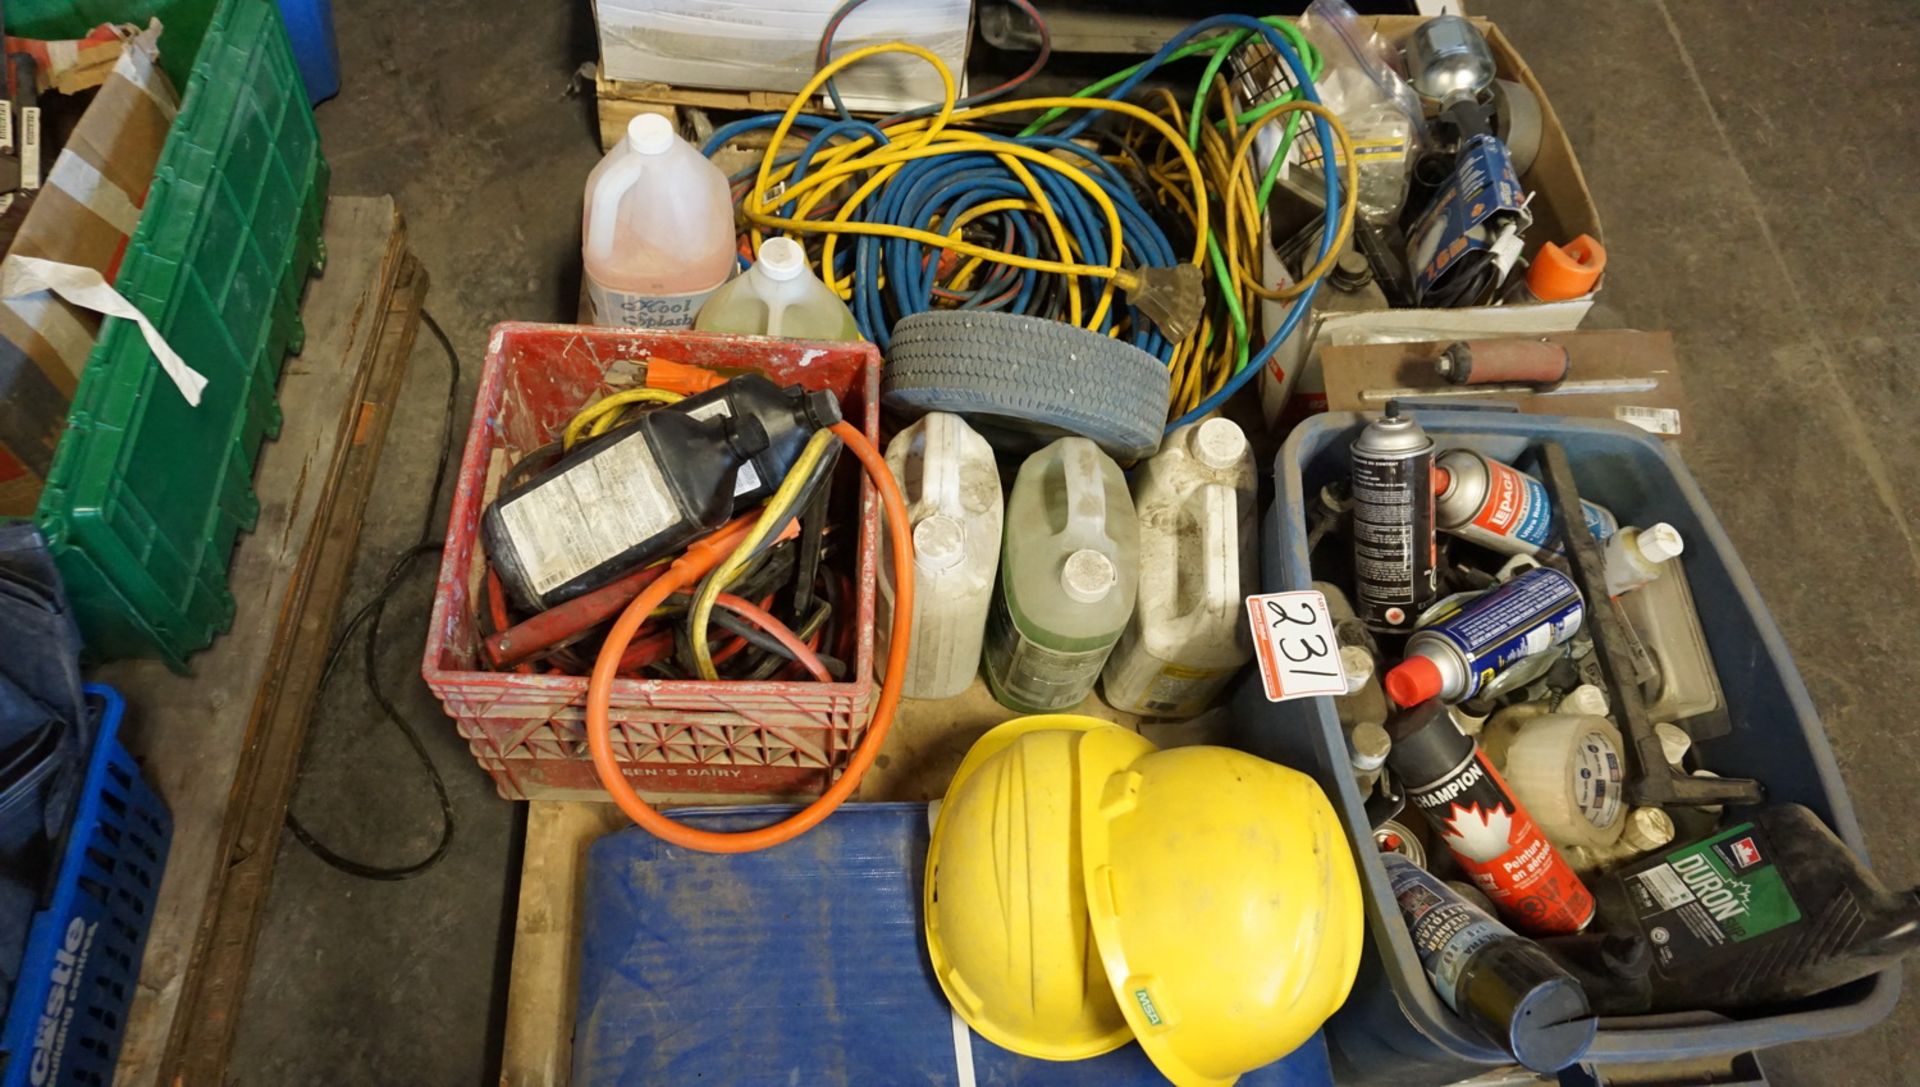 LOT - BATTERY & CABLES, EXTENSION CORDS, OIL, PAINT CANS (2 SKIDS) - Image 2 of 2